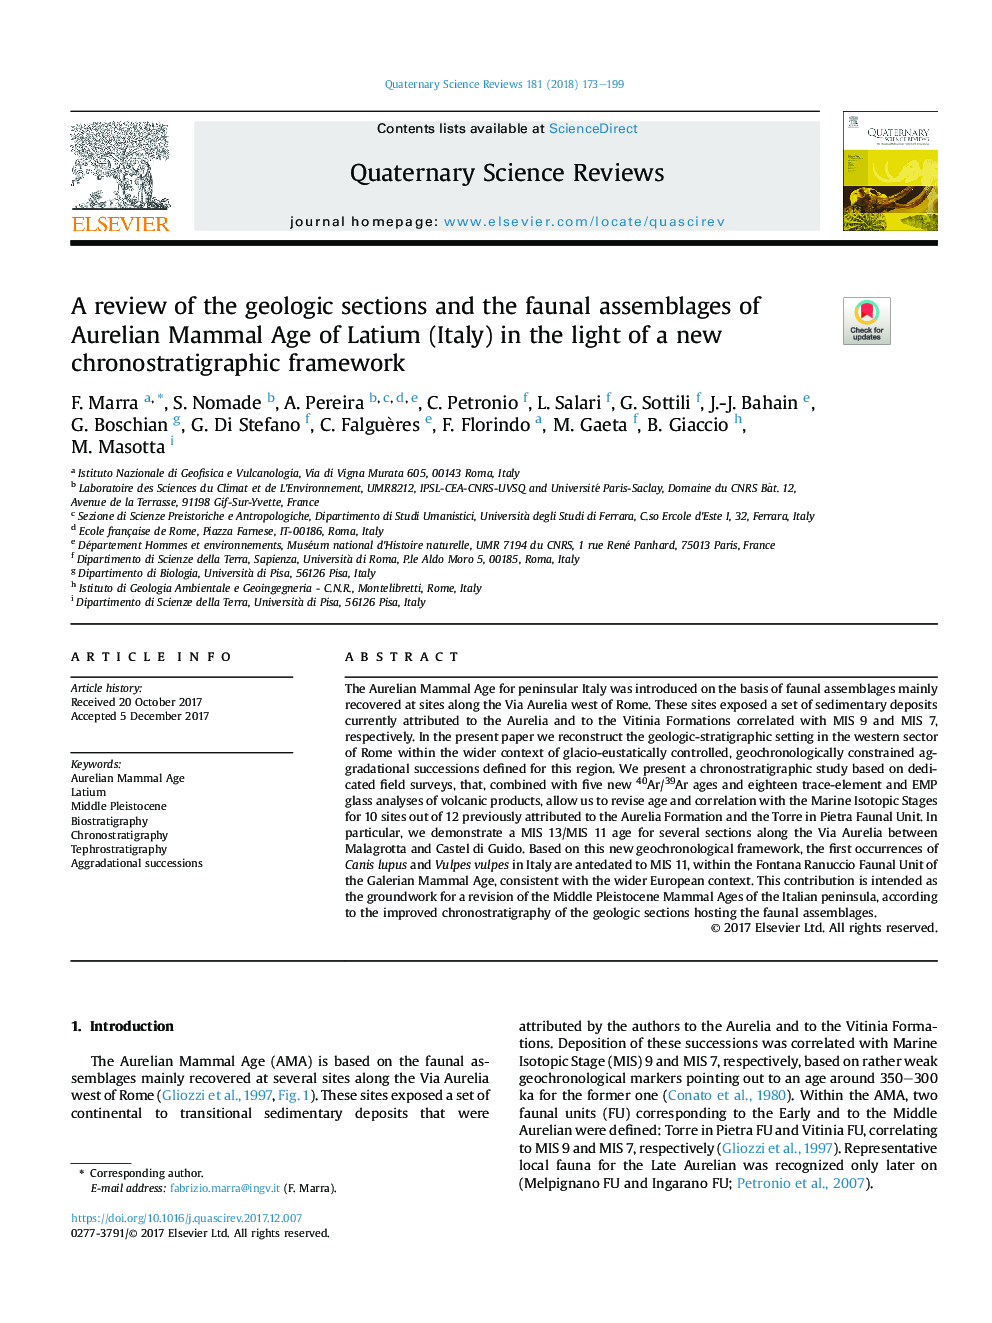 A review of the geologic sections and the faunal assemblages of Aurelian Mammal Age of Latium (Italy) in the light of a new chronostratigraphic framework